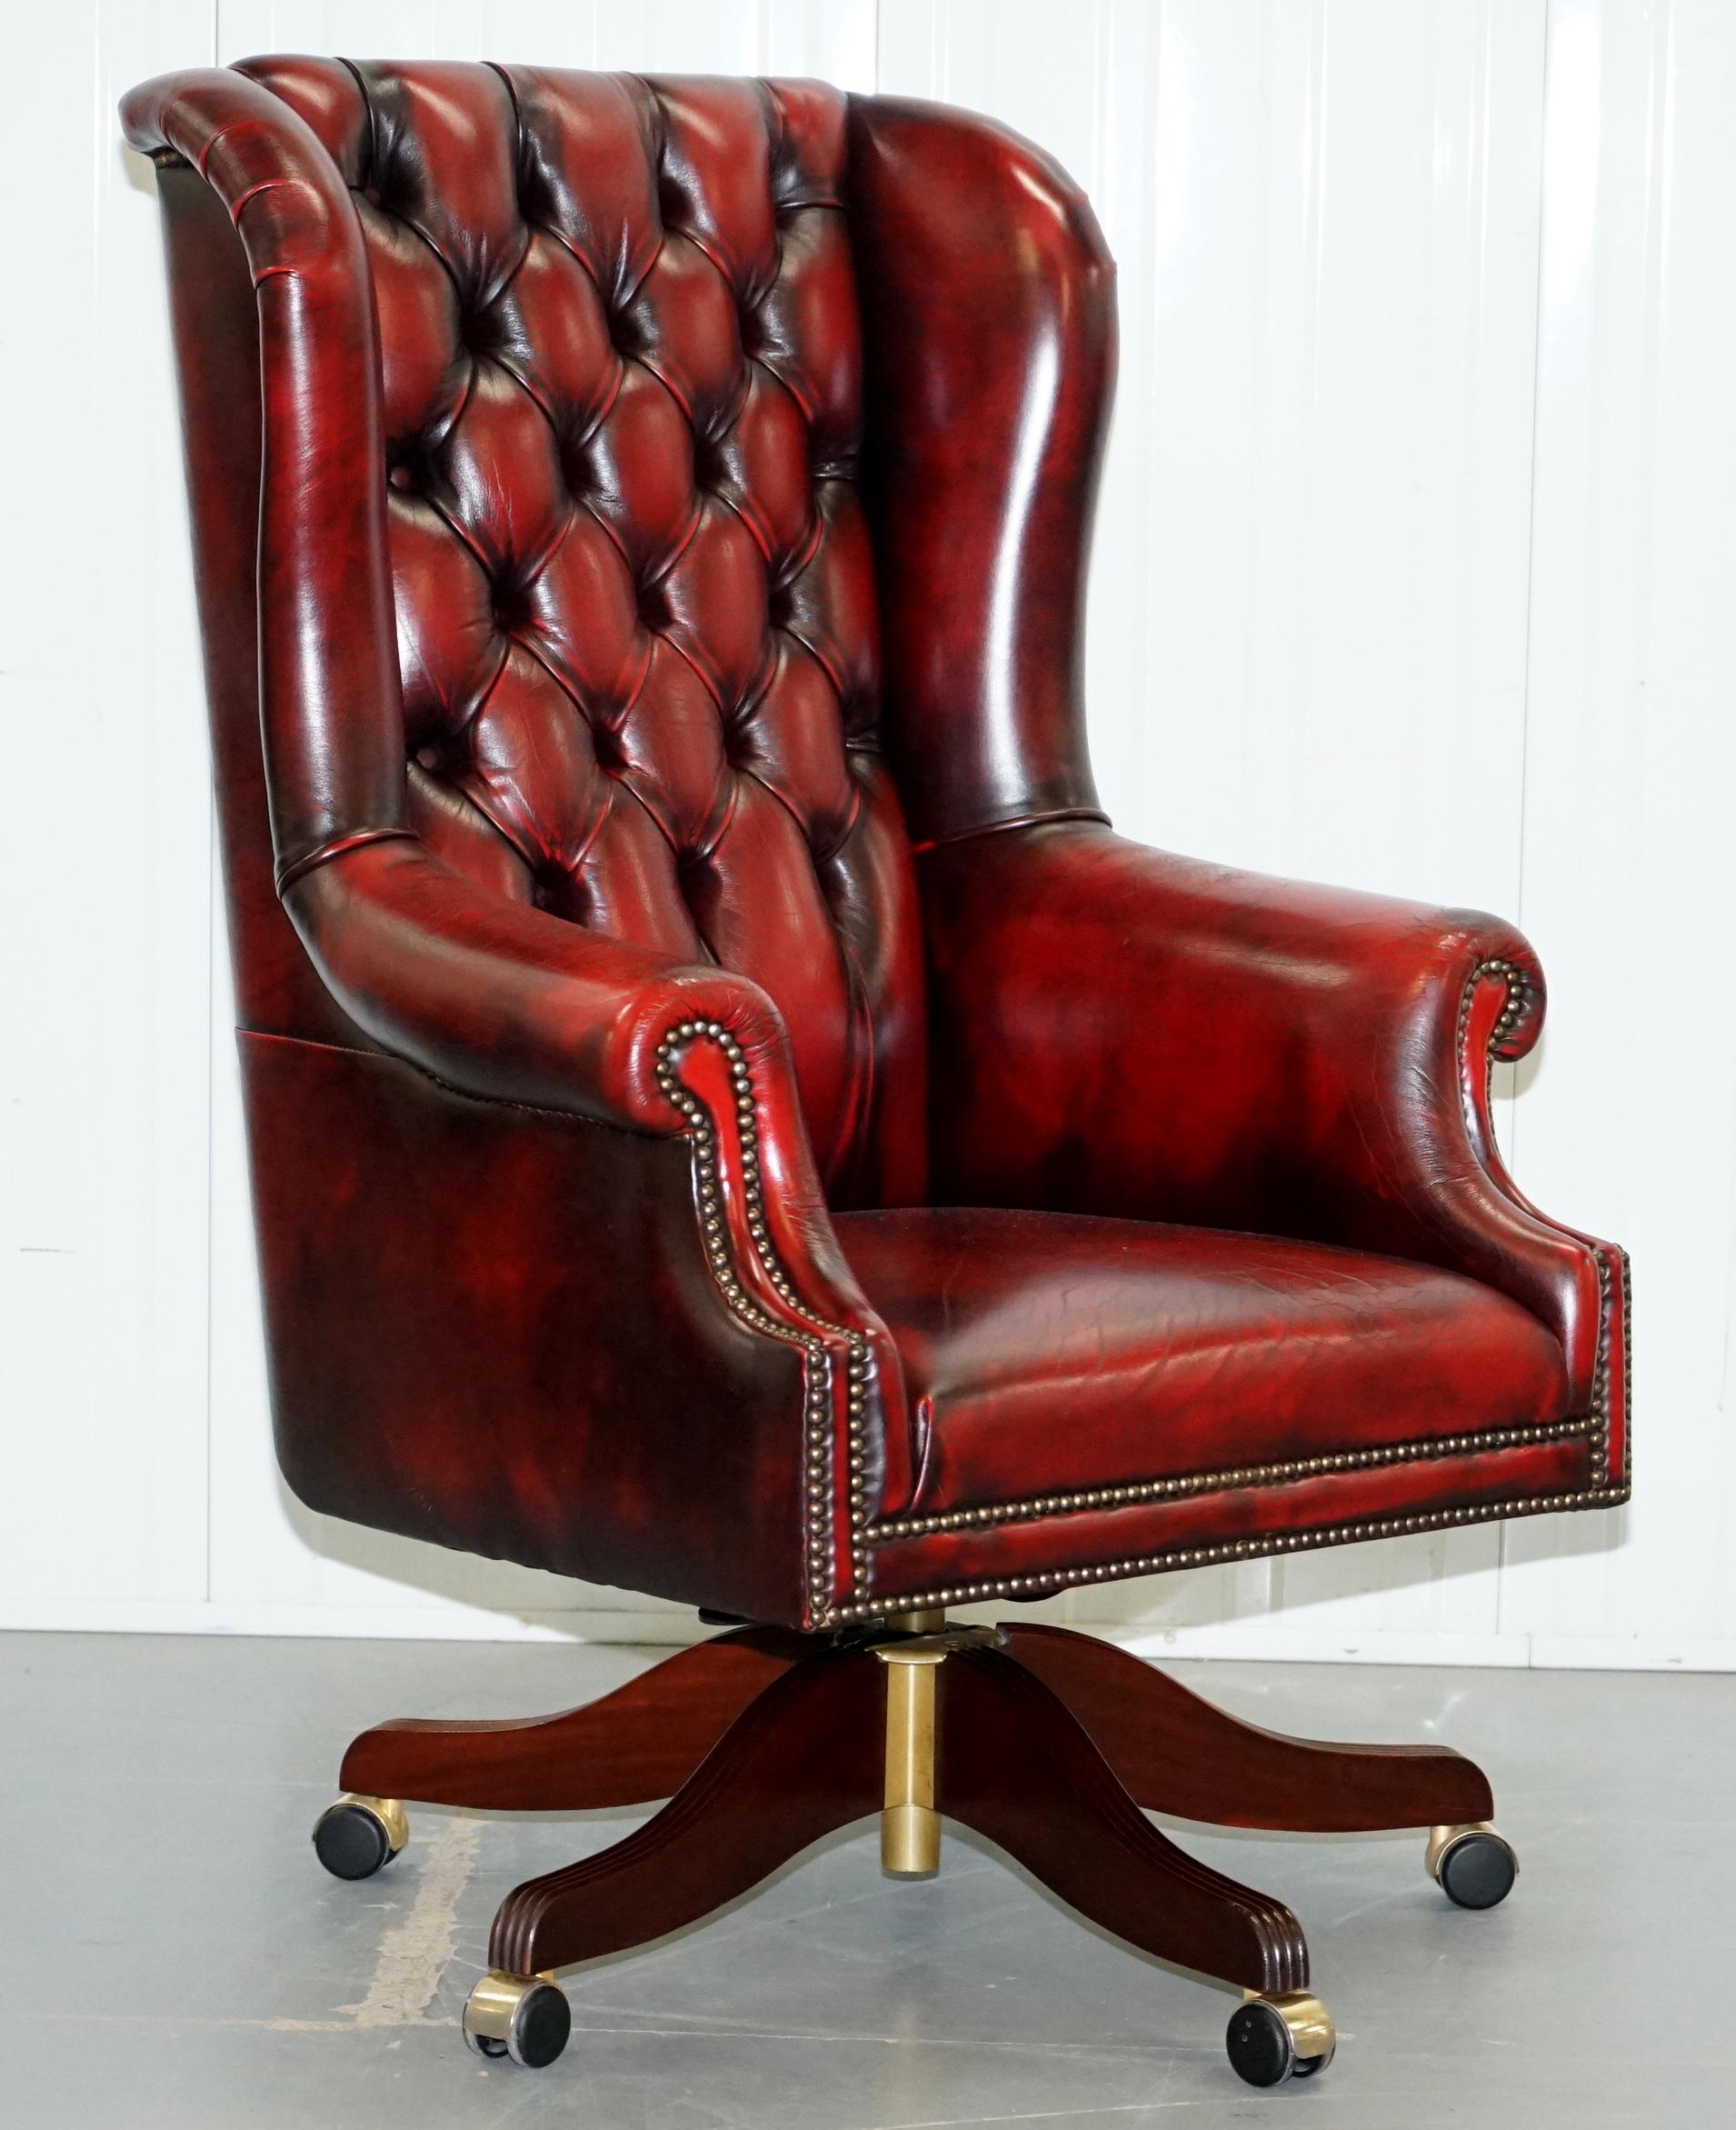 We are delighted to offer for sale this lovely RRP £3699 Bevan Funnell Presidents oxblood leather swivel office chair

I absolutely love this model of office chair, its as comfortable as your favourite wingback armchair but its used for work, what